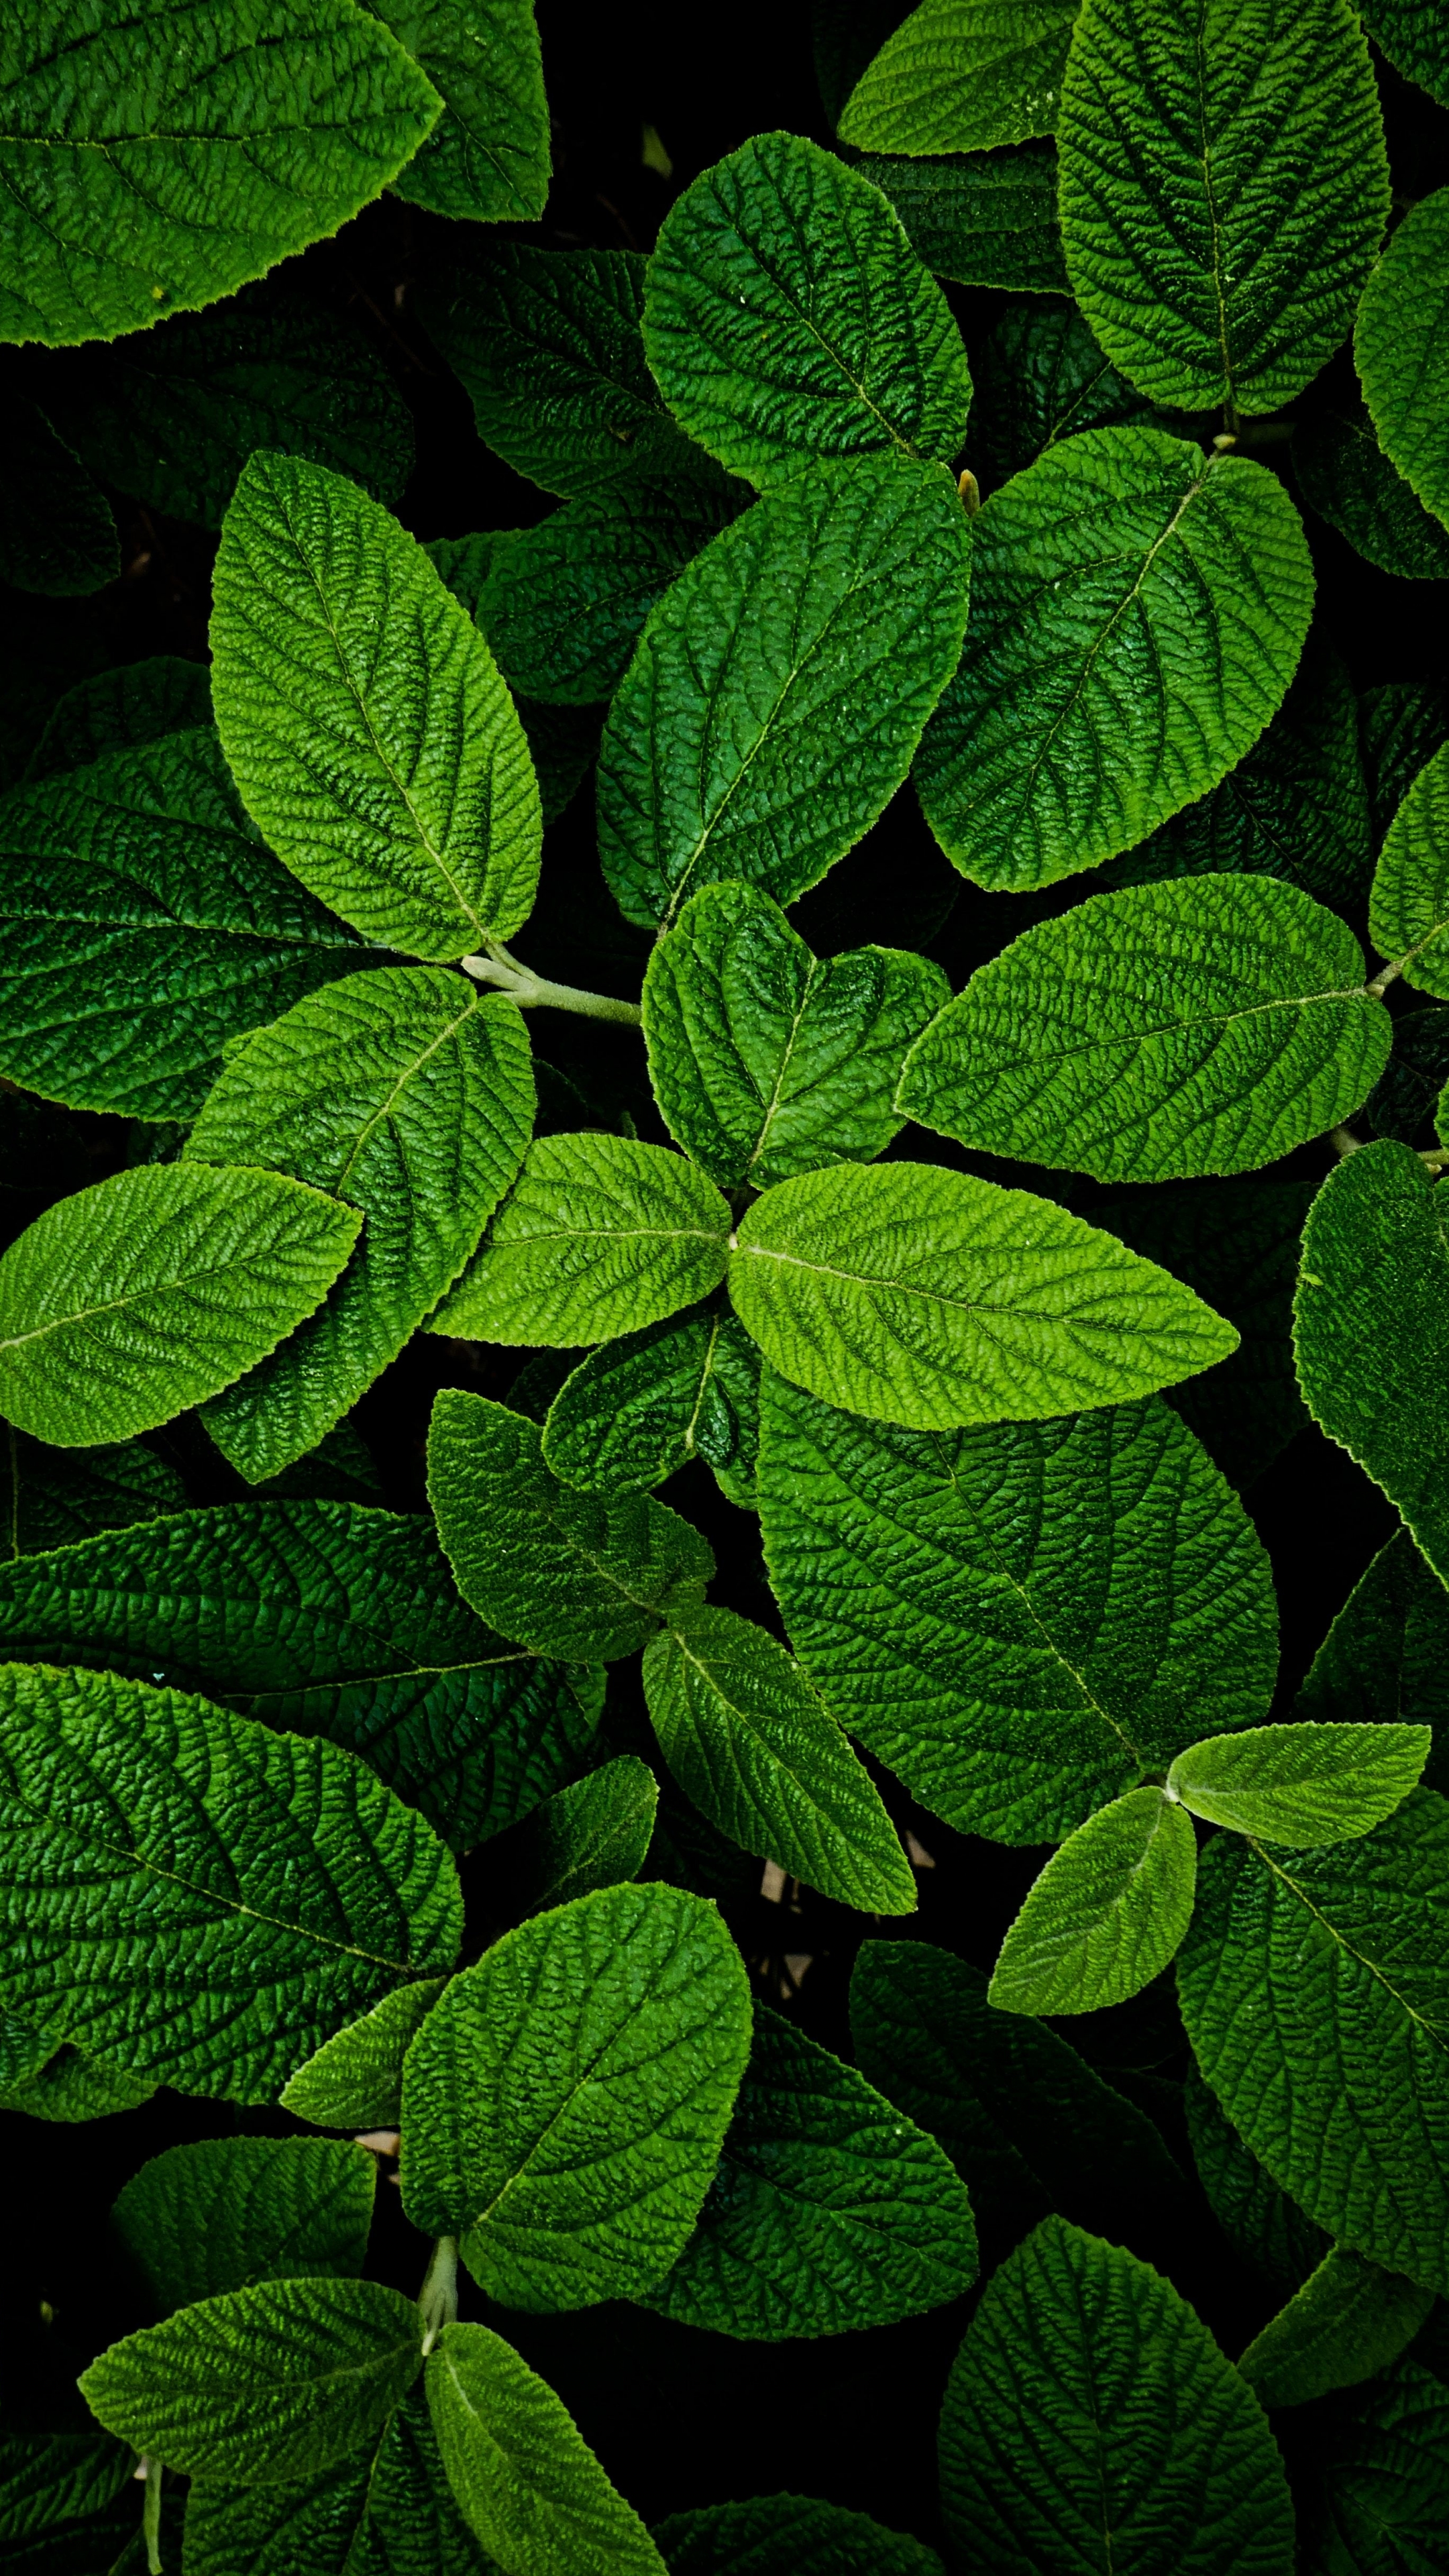 Download Wallpaper 2160x3840 Leaves Macro Bright And Green 2160p Sony Xperia Z5 Premium Dual 2160x3840 Hd Background